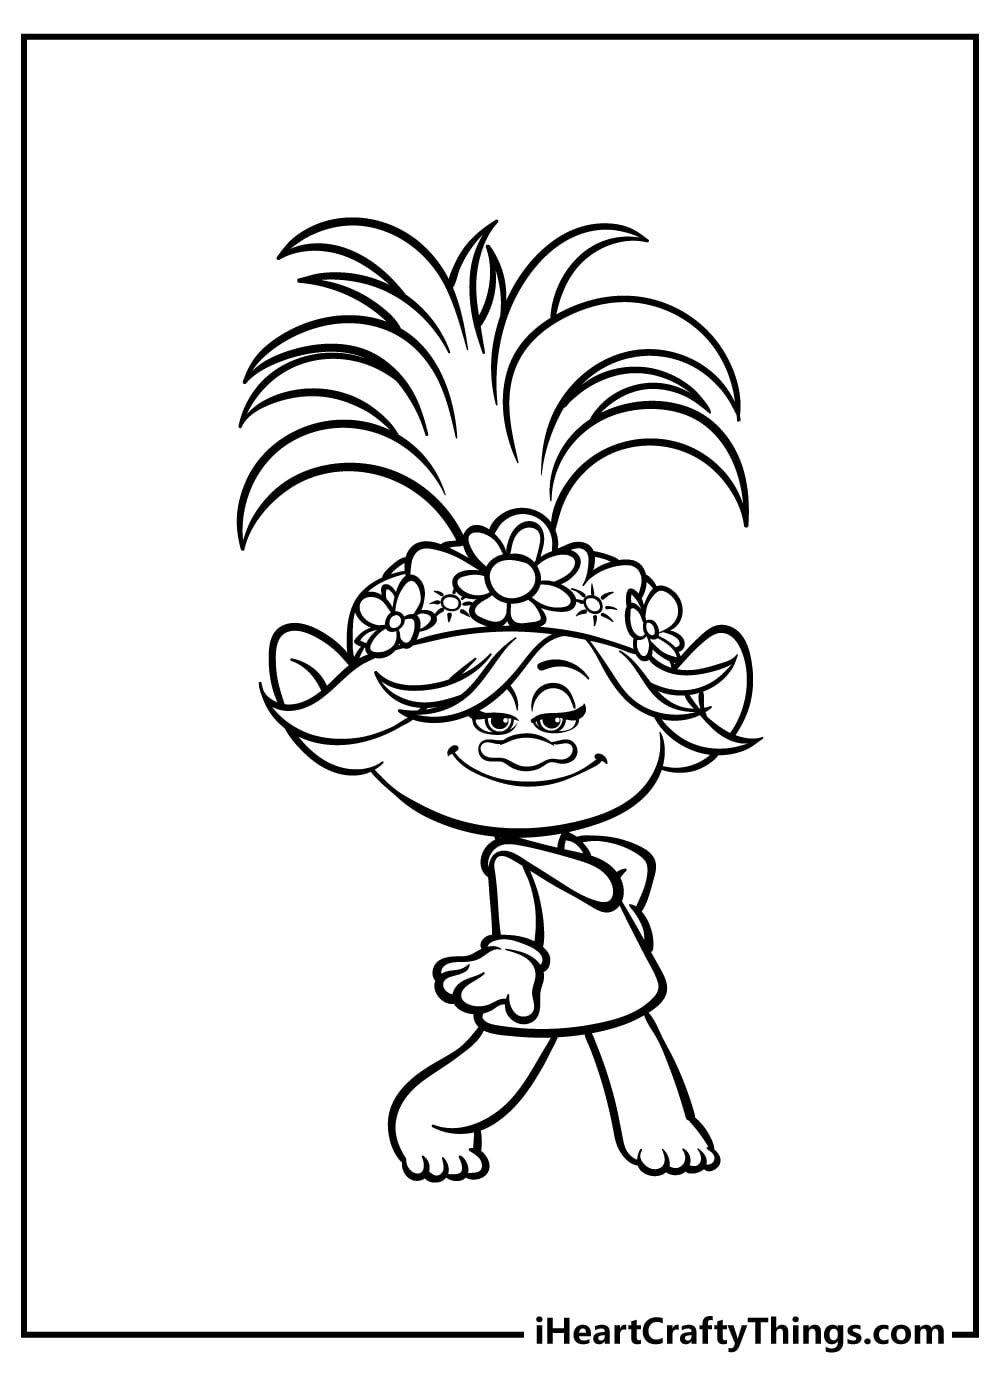 Printable Troll Coloring Pages Updated 2022 - Free Printable